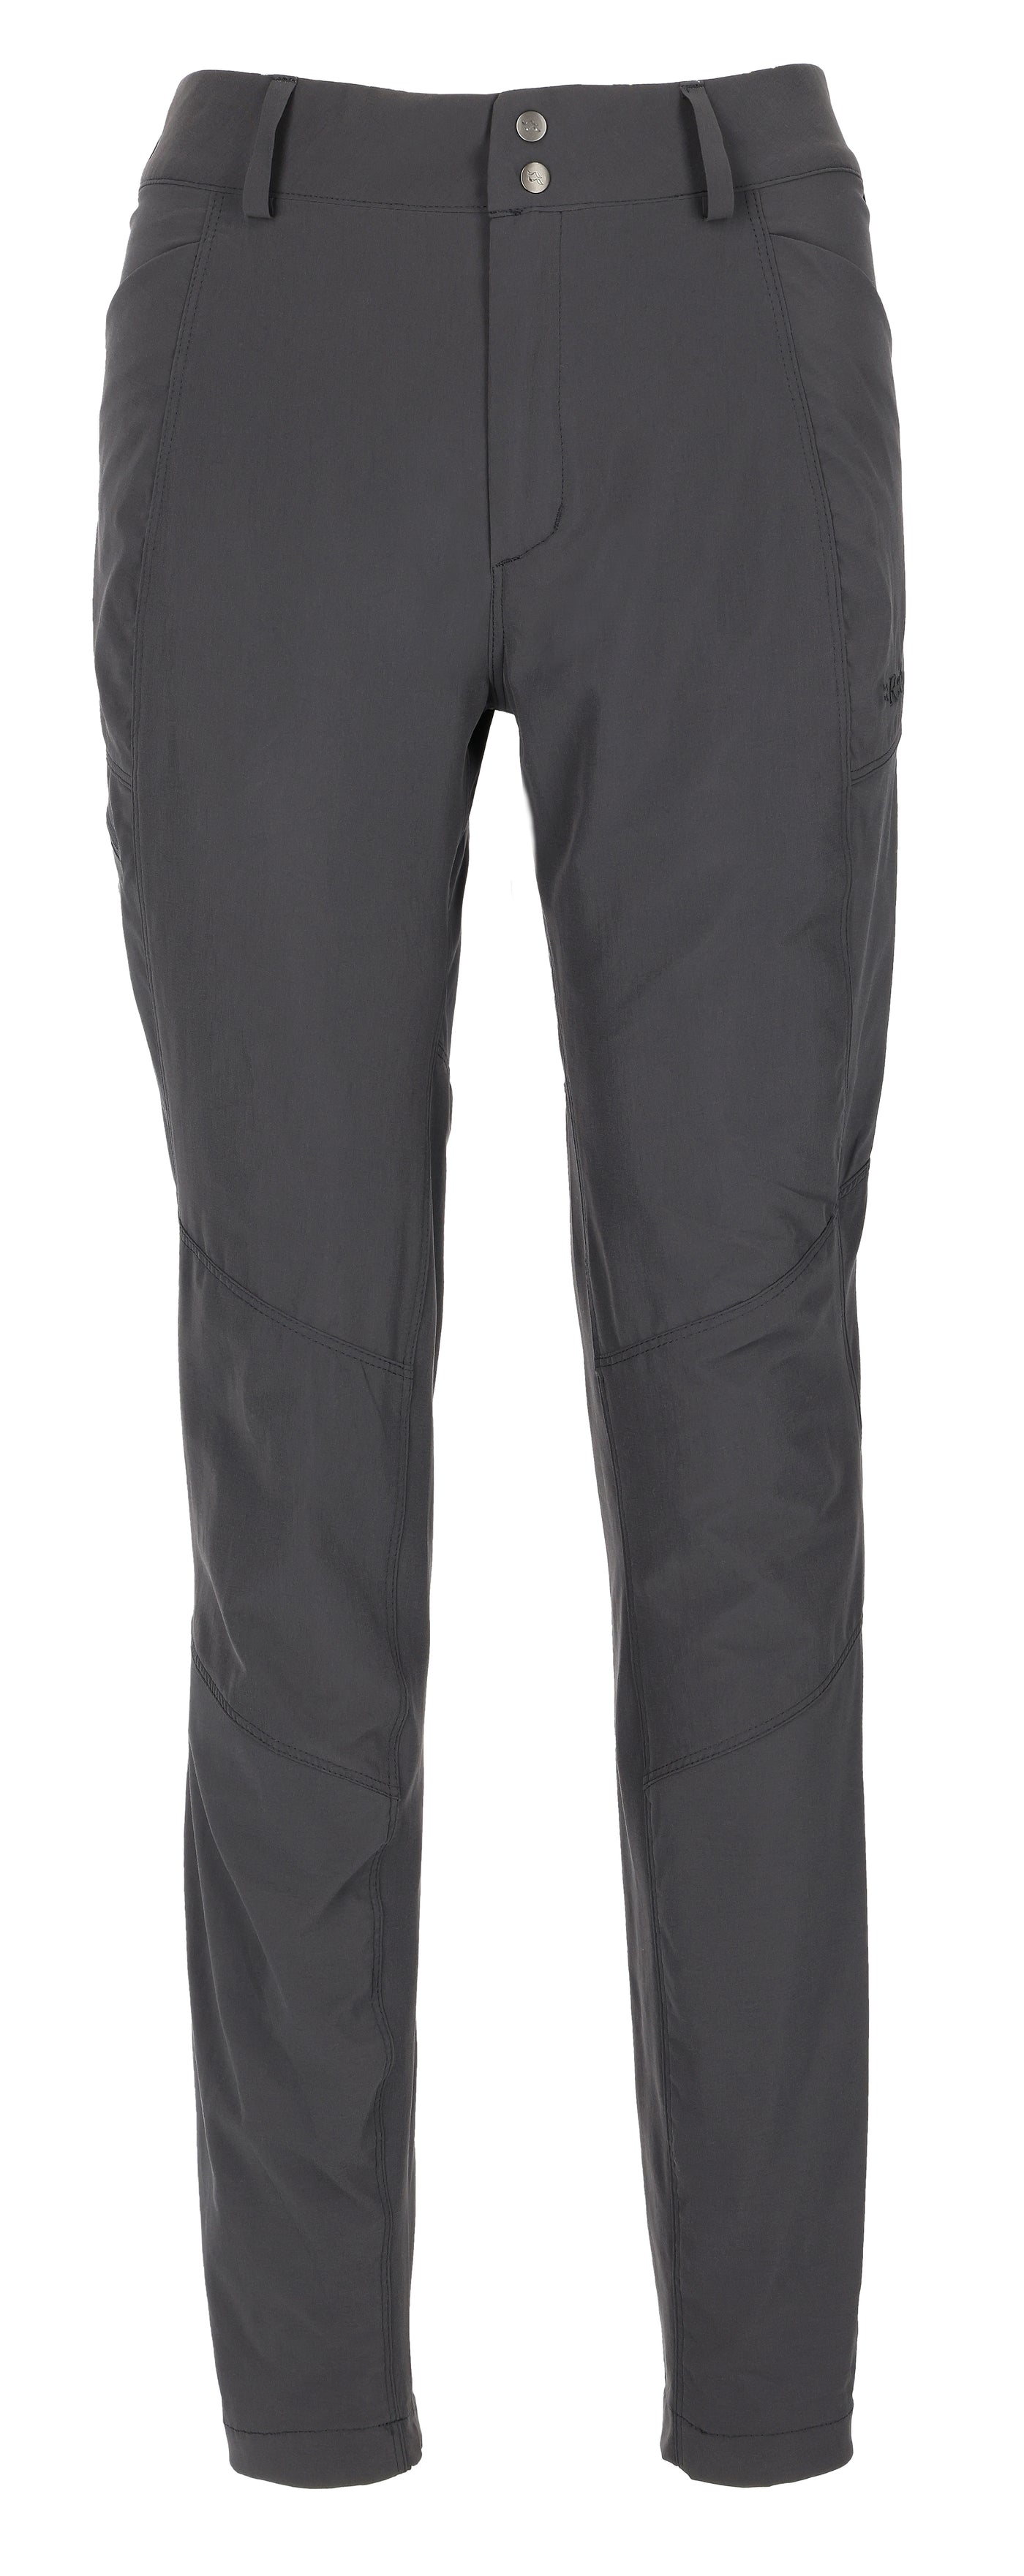 Rab Incline Light Pant Womens Anthracite